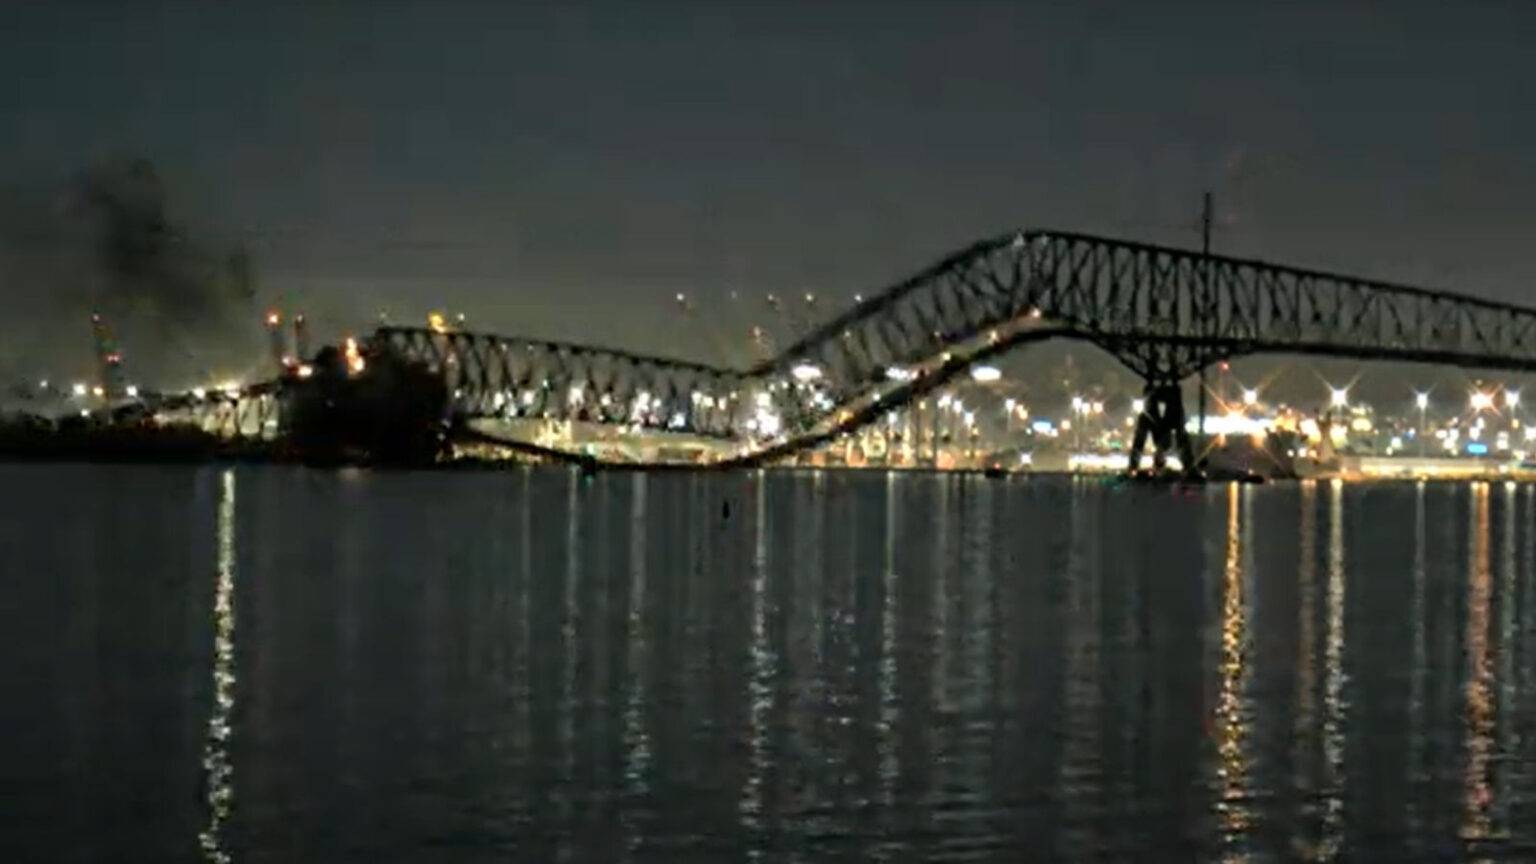 Breaking - 'Mass casualty event' as Baltimore Key Bridge collapses after being hit by ship